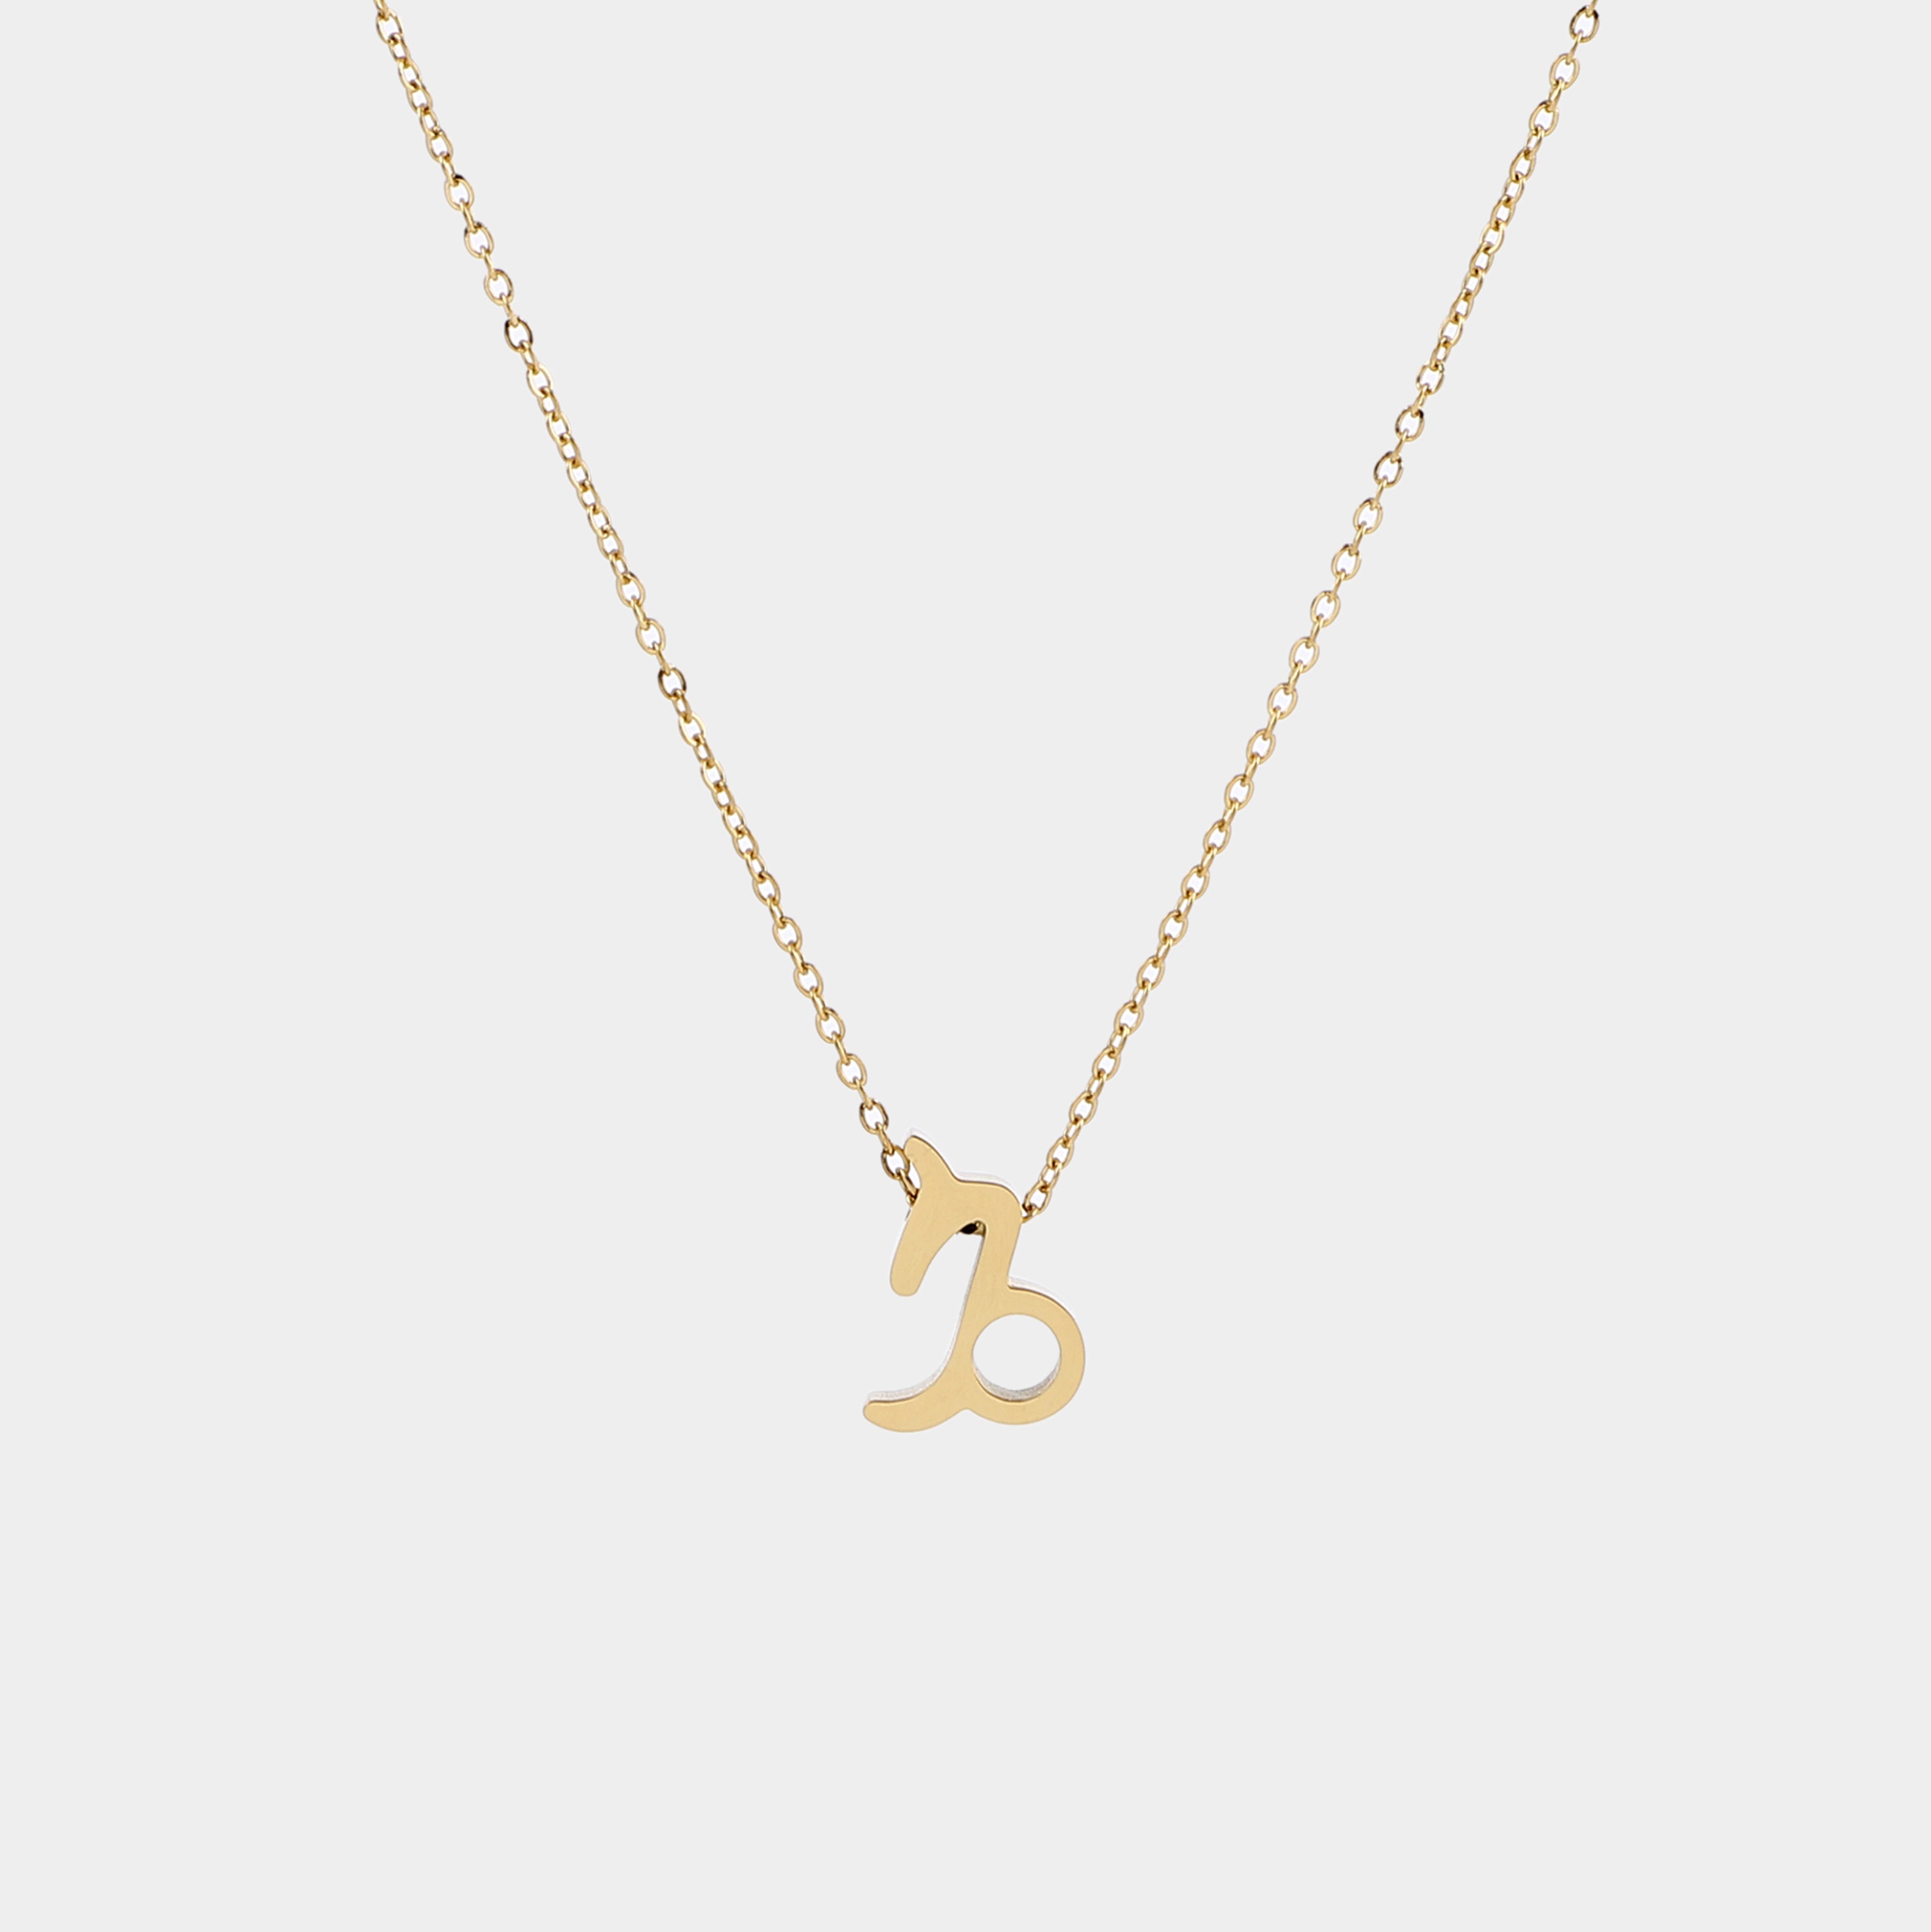 Star sign necklace | birth sign Gold